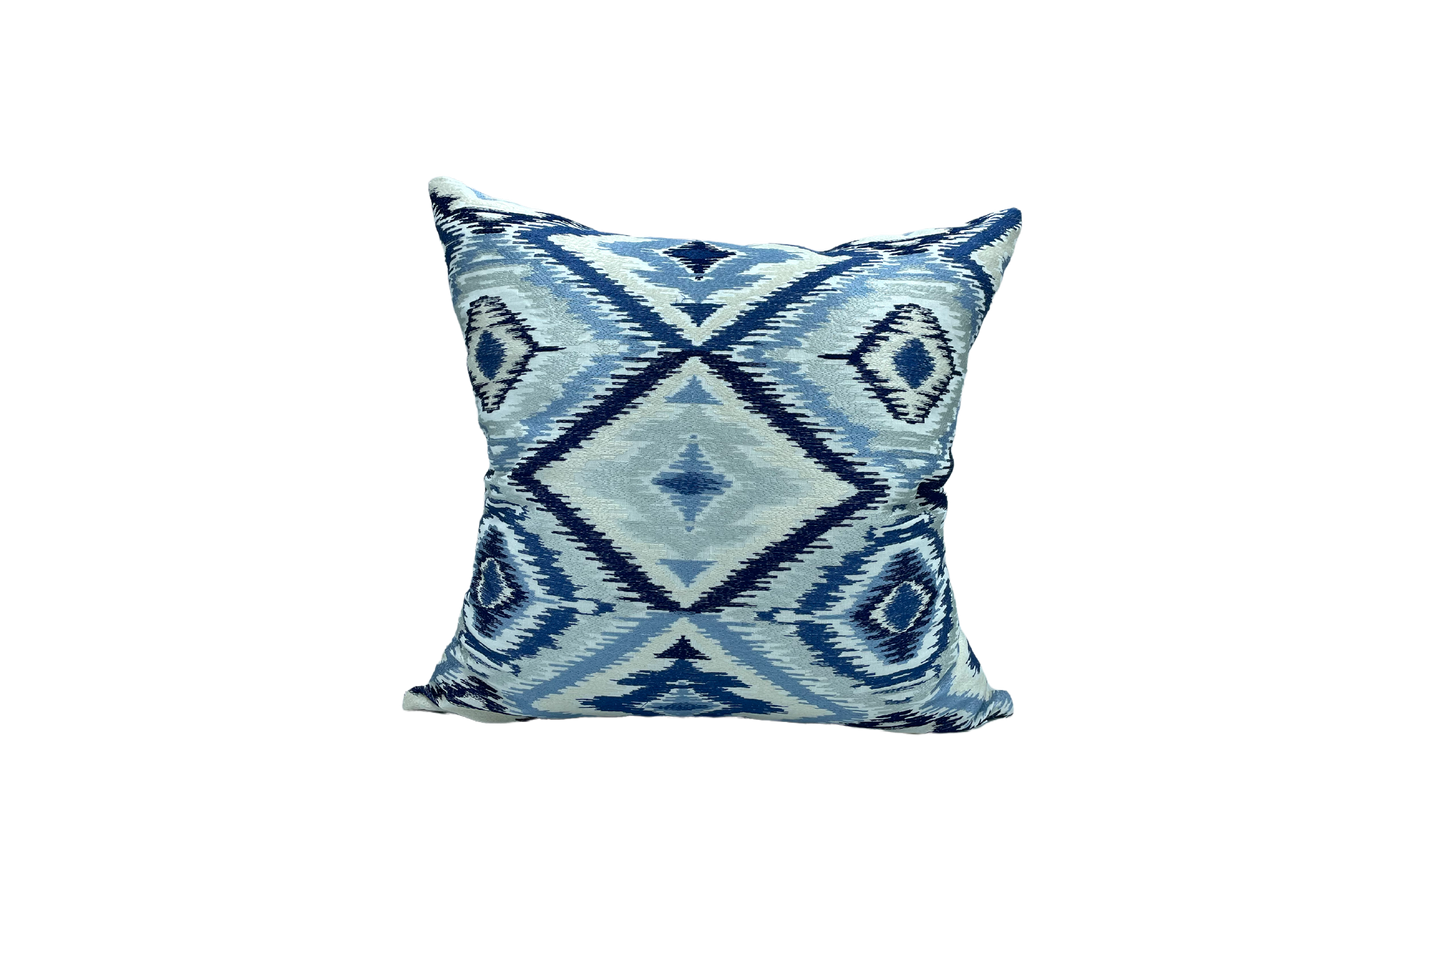 Shades of Blue - Sustainable Décor Pillows